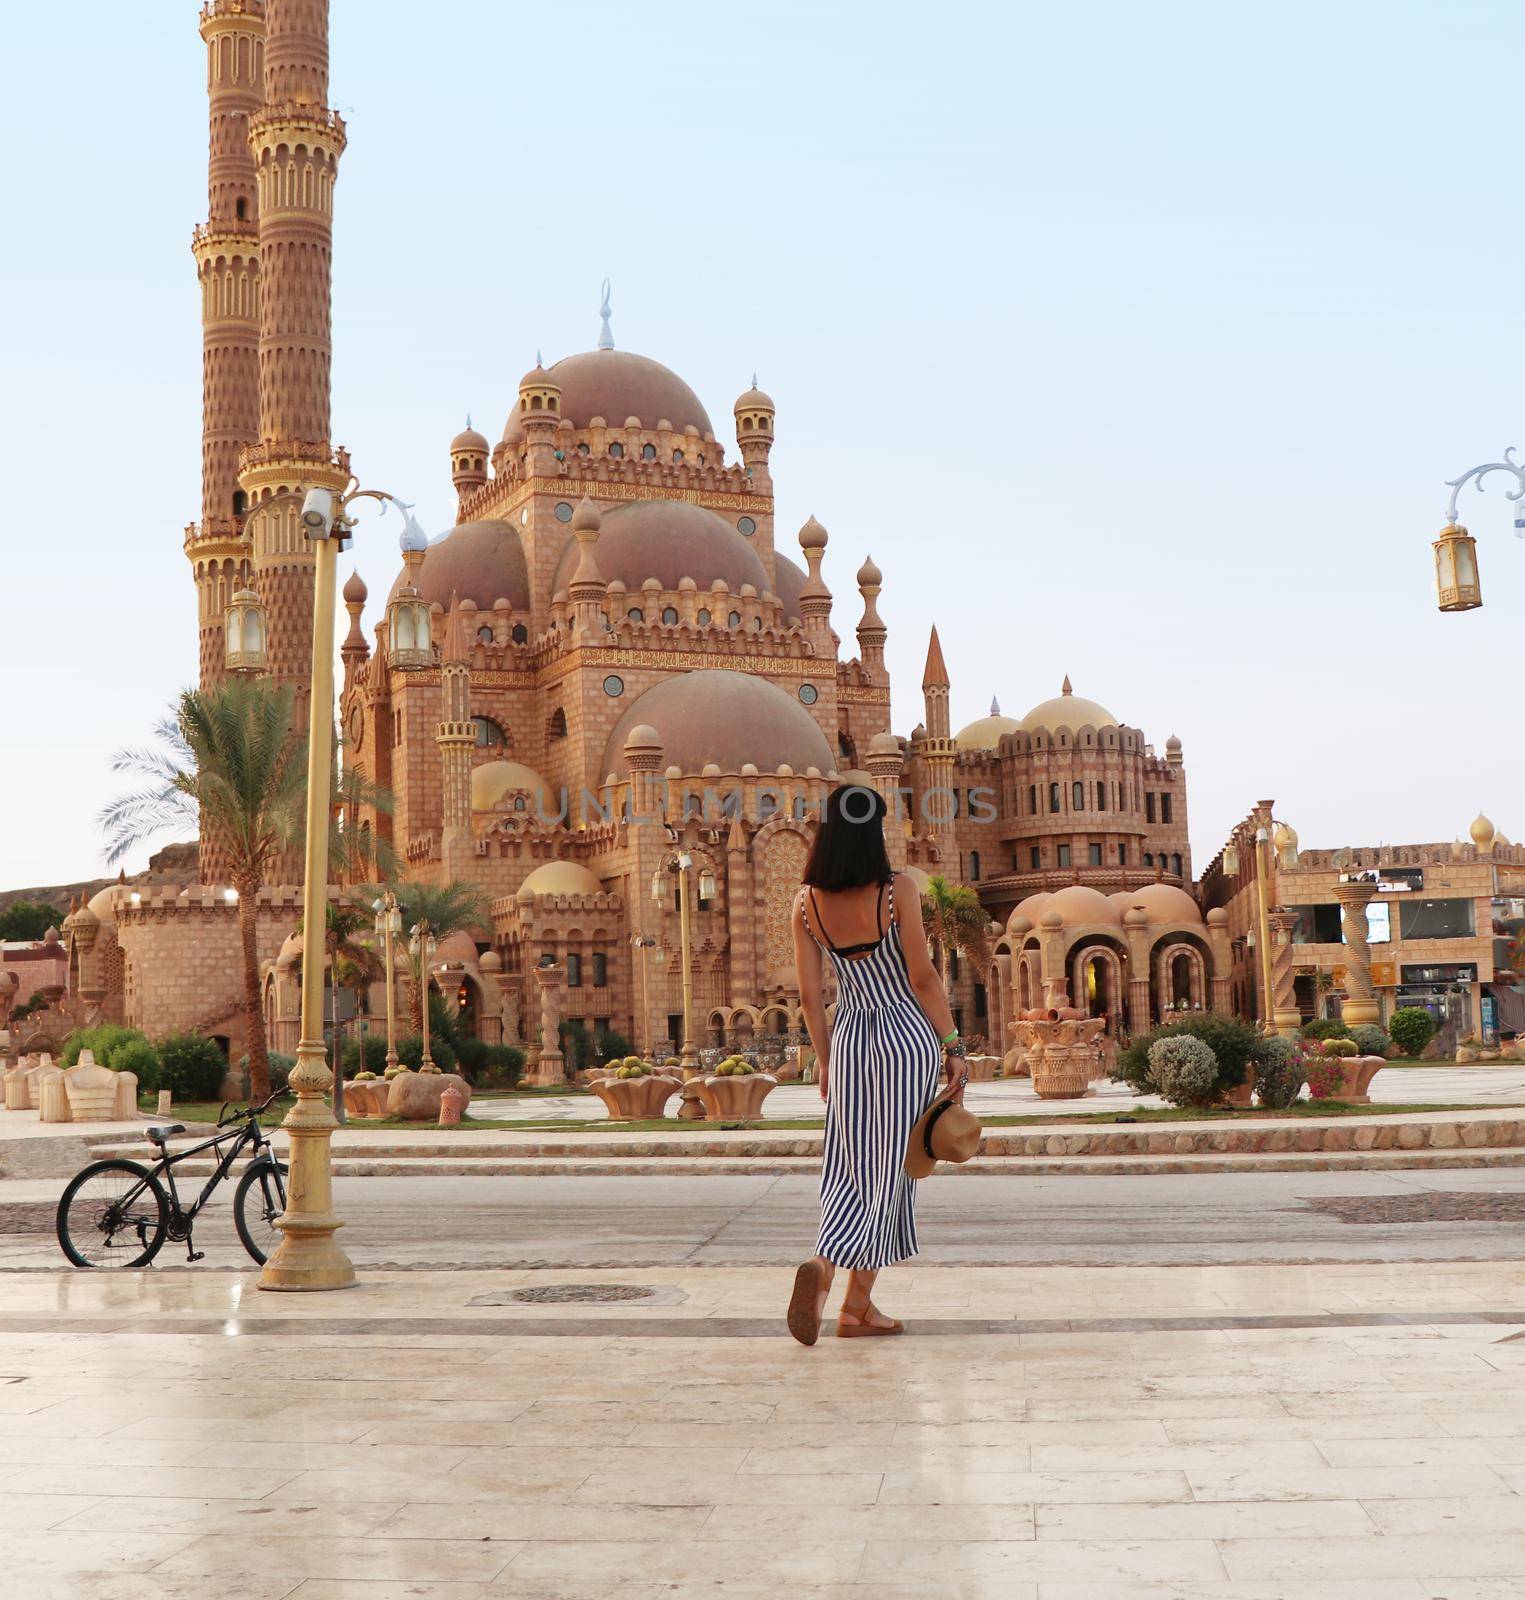 young girl on the background of the El Mustafa Mosque in the Old City of Egypt. Travel to egypt concept. An ancient mosque in the tourist city of Sharm El Sheikh. High quality photo